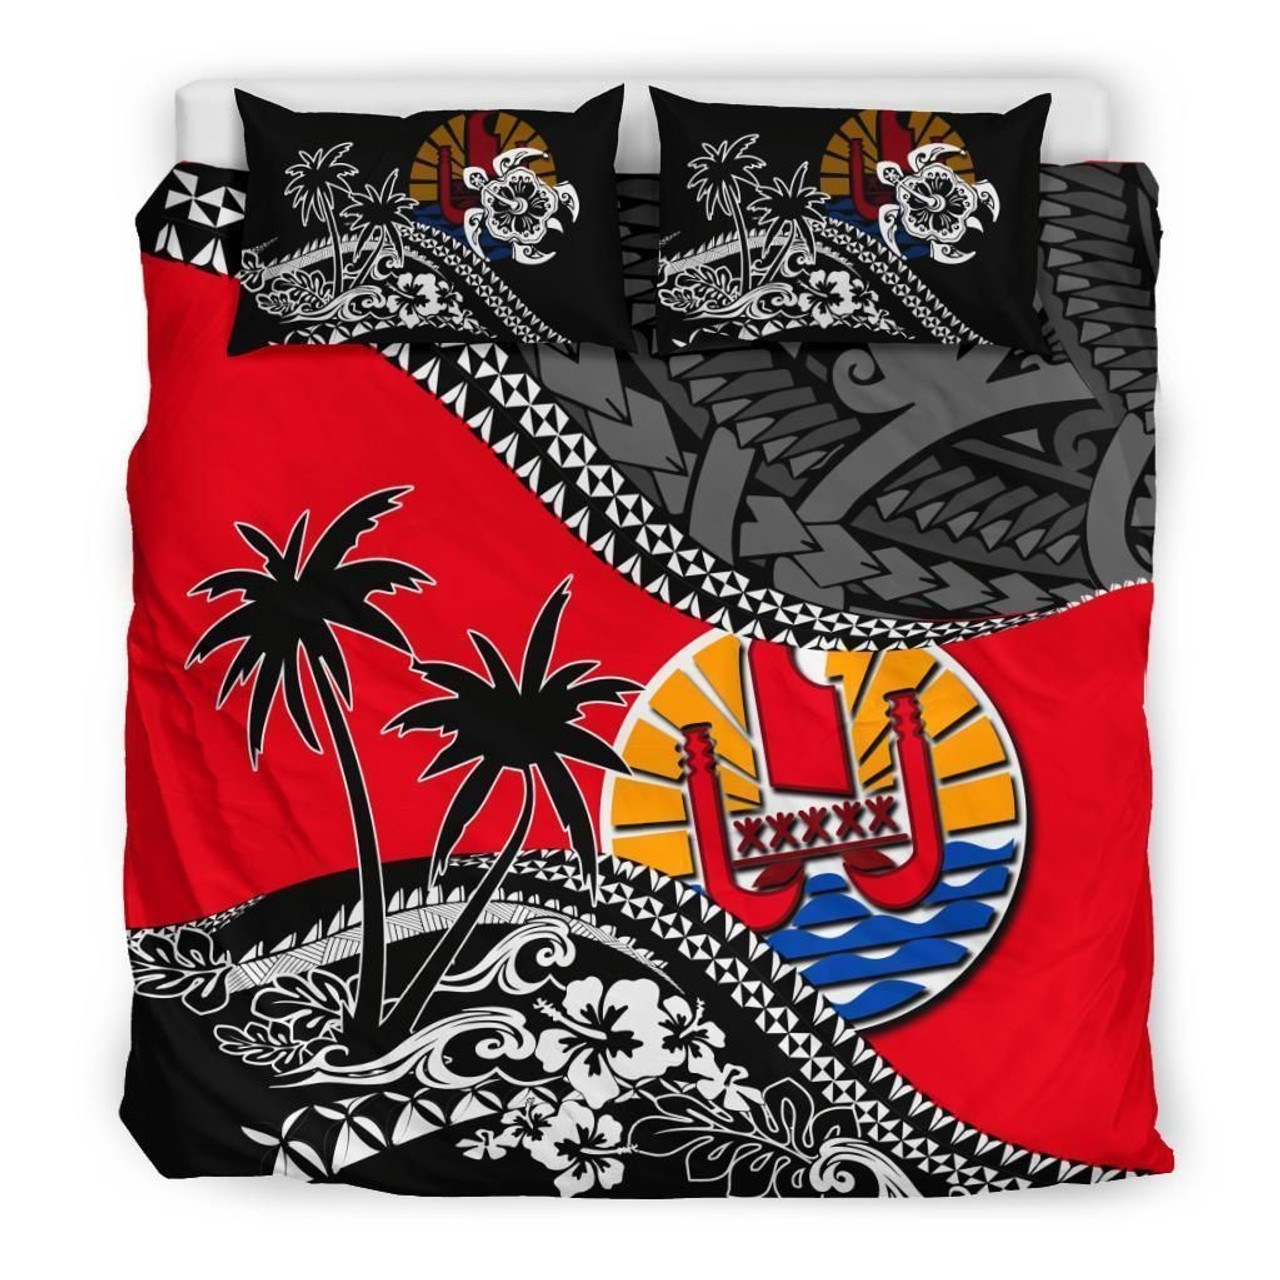 French Polynesia Duvet Cover Set - French Polynesian Flag Fall In The Wave 1